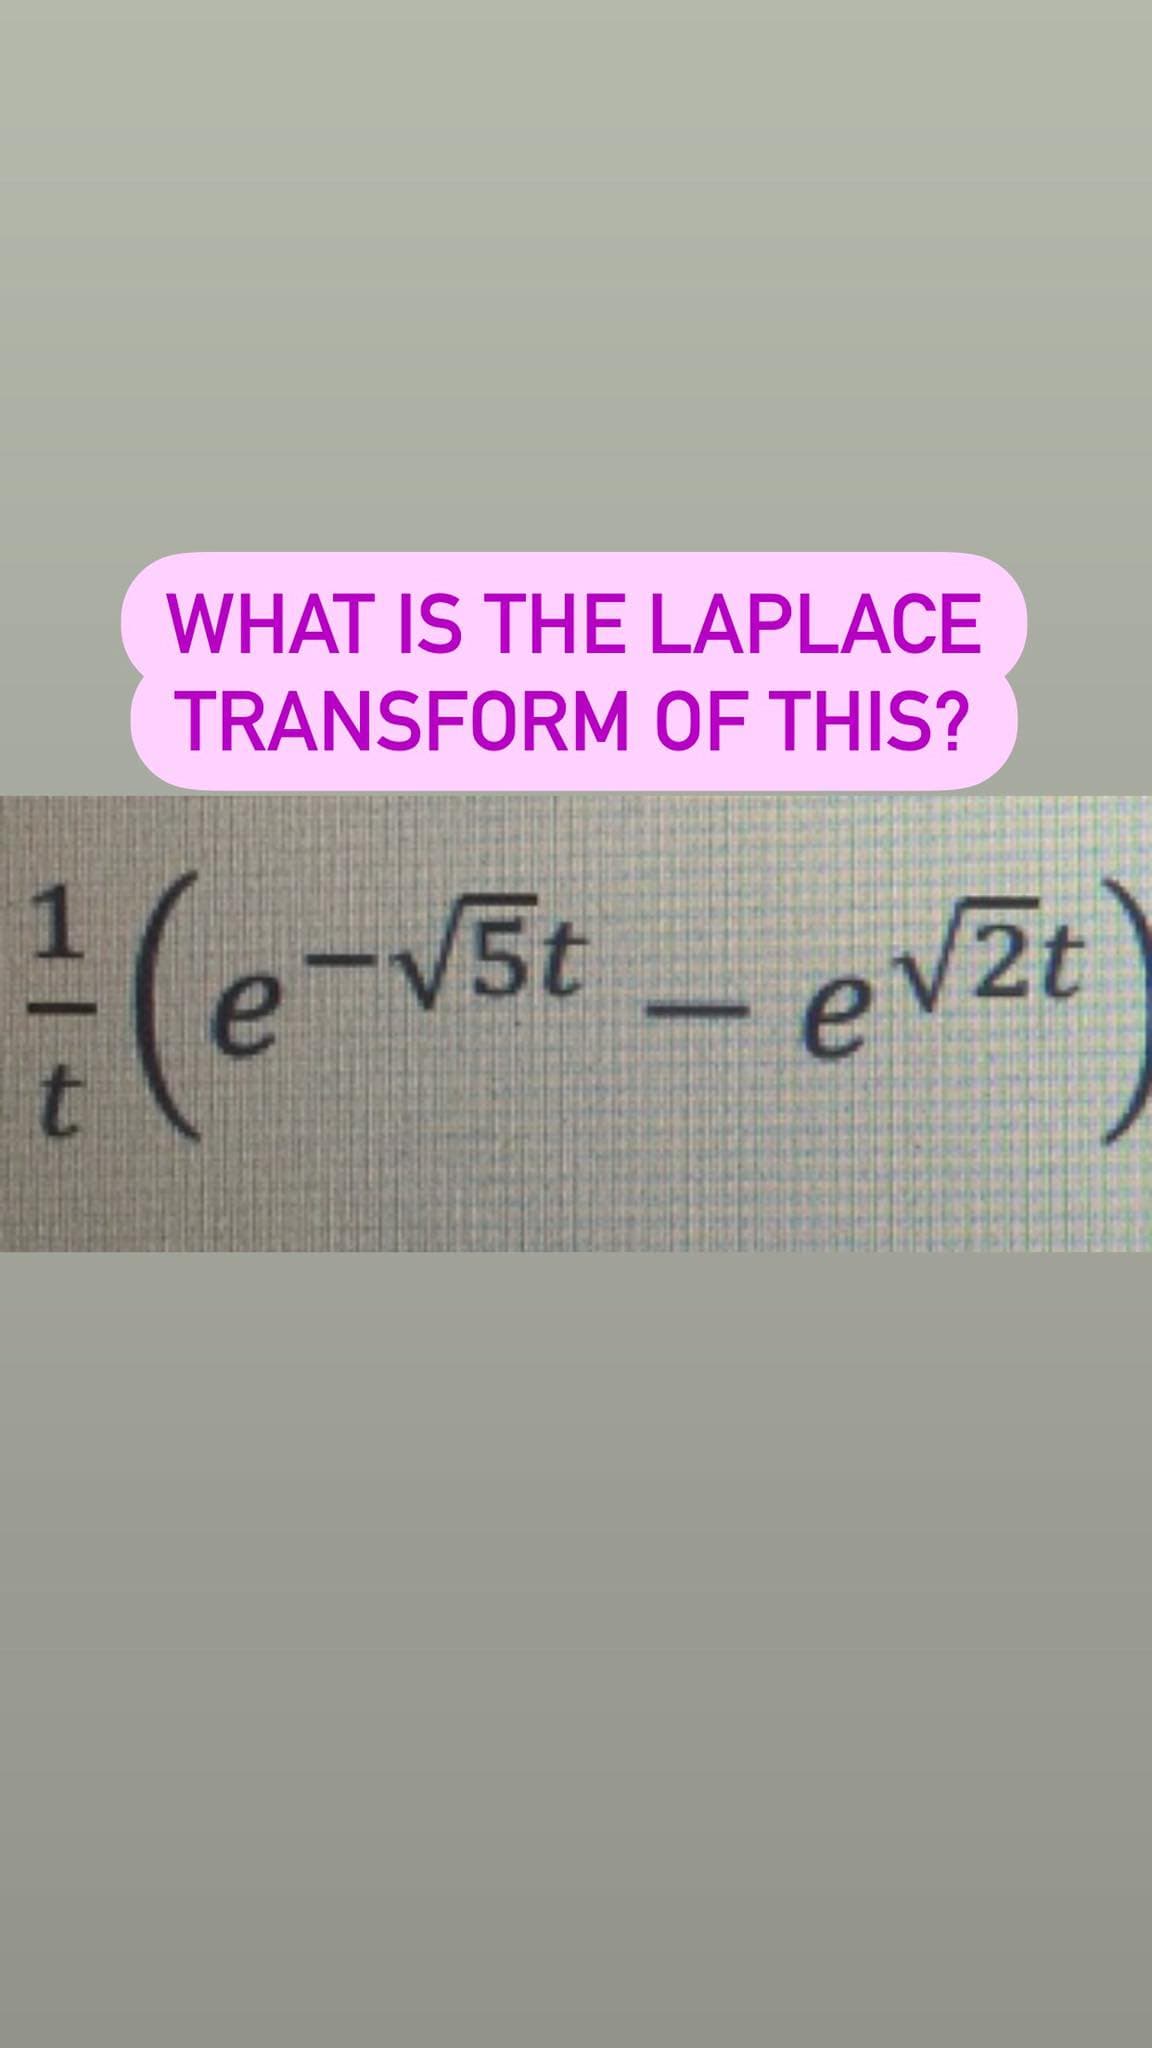 WHAT IS THE LAPLACE
TRANSFORM OF THIS?
-V5t
2t
